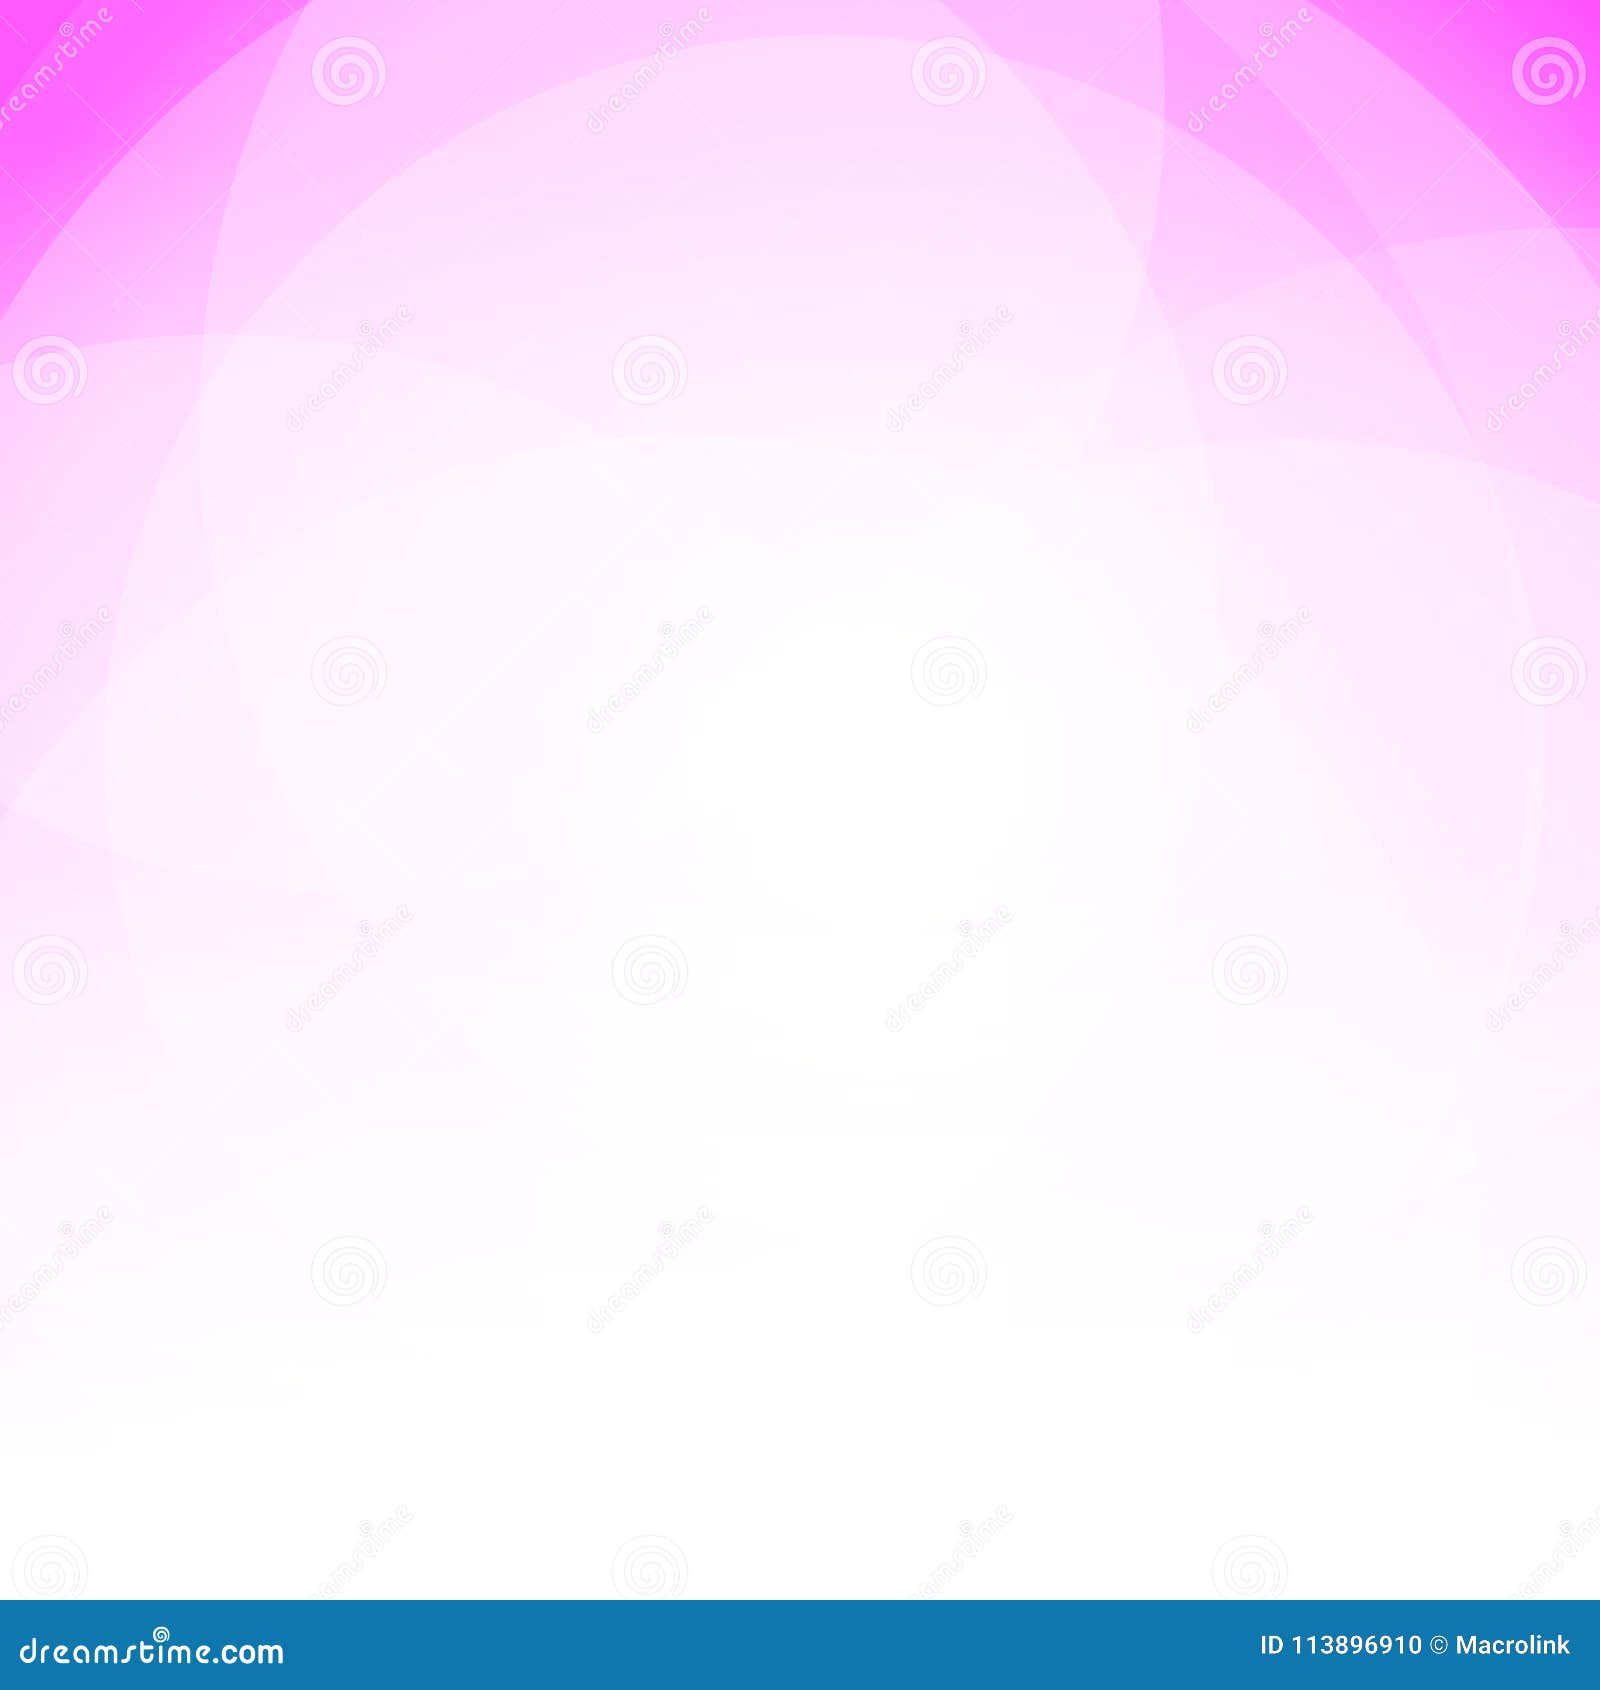 Pink Background with White Glow - Vector Shiny Romantic Backdrop for ...